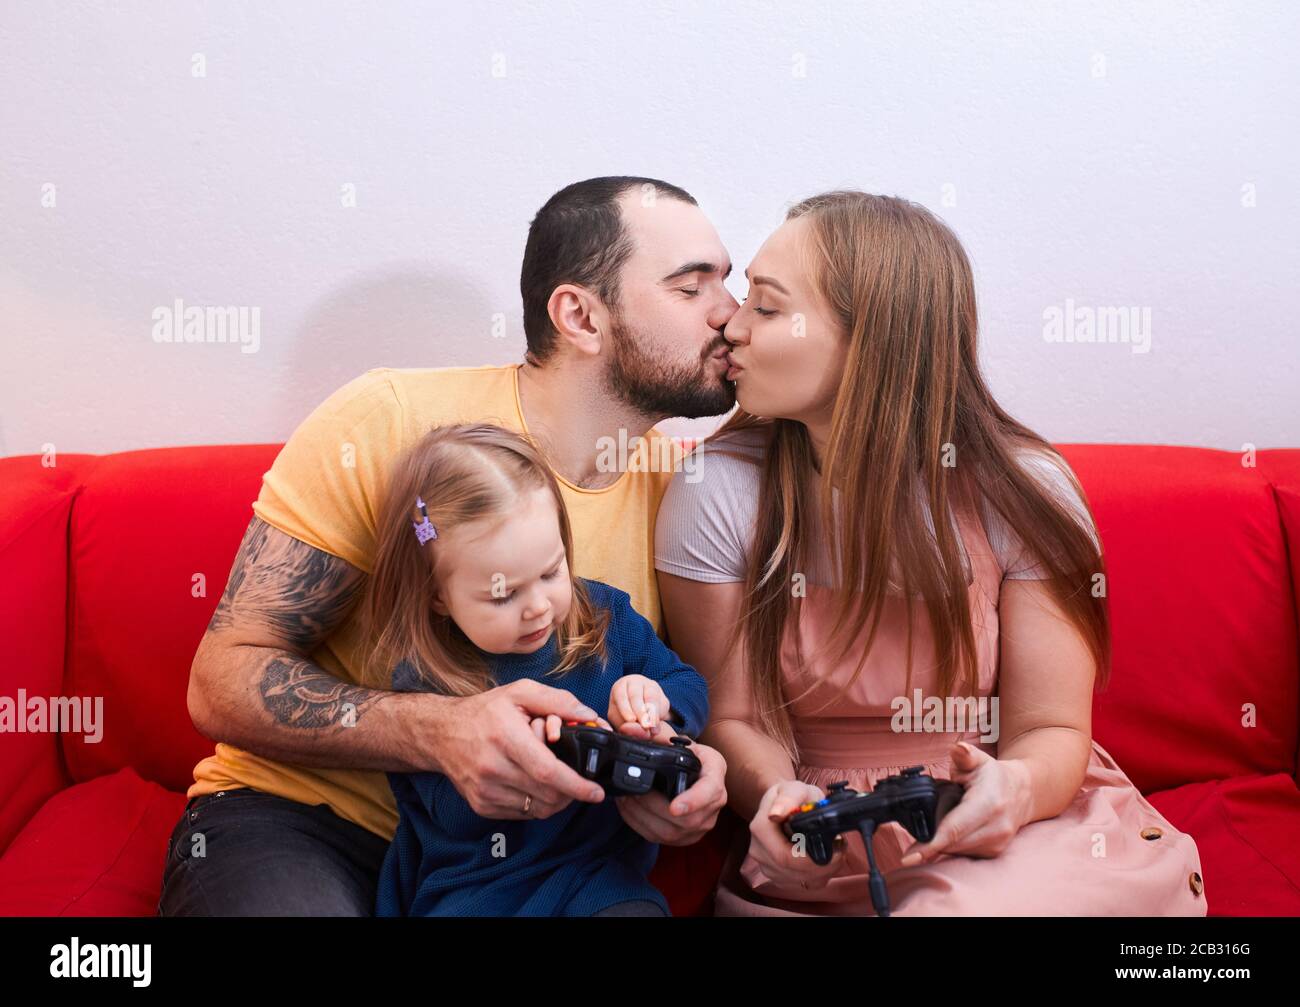 caucasian adorable young parents spend time playing video games with joysticks, sitting on red sofa, modern married couple and cute daughter image